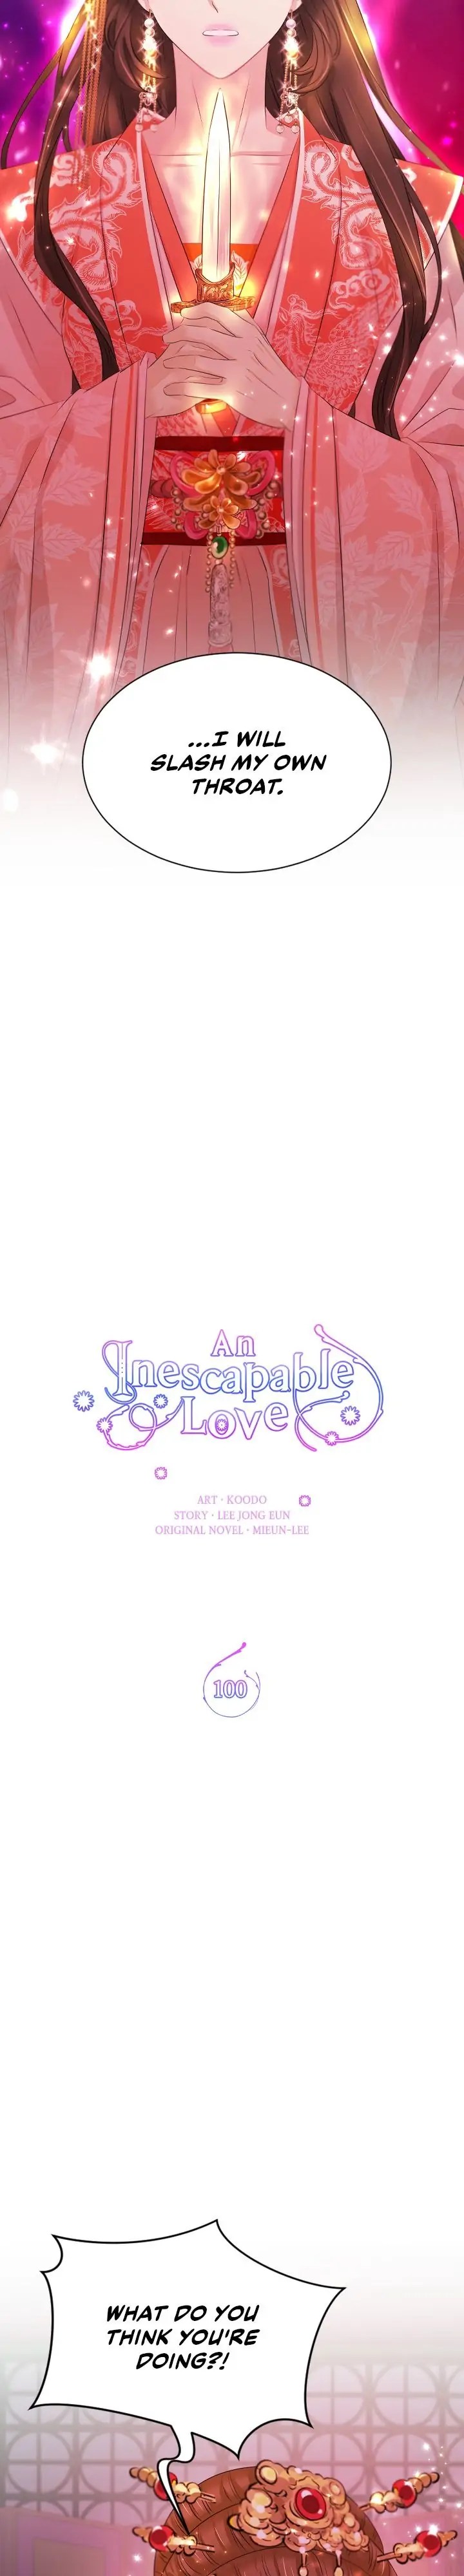 An Inescapable Love - Page 2